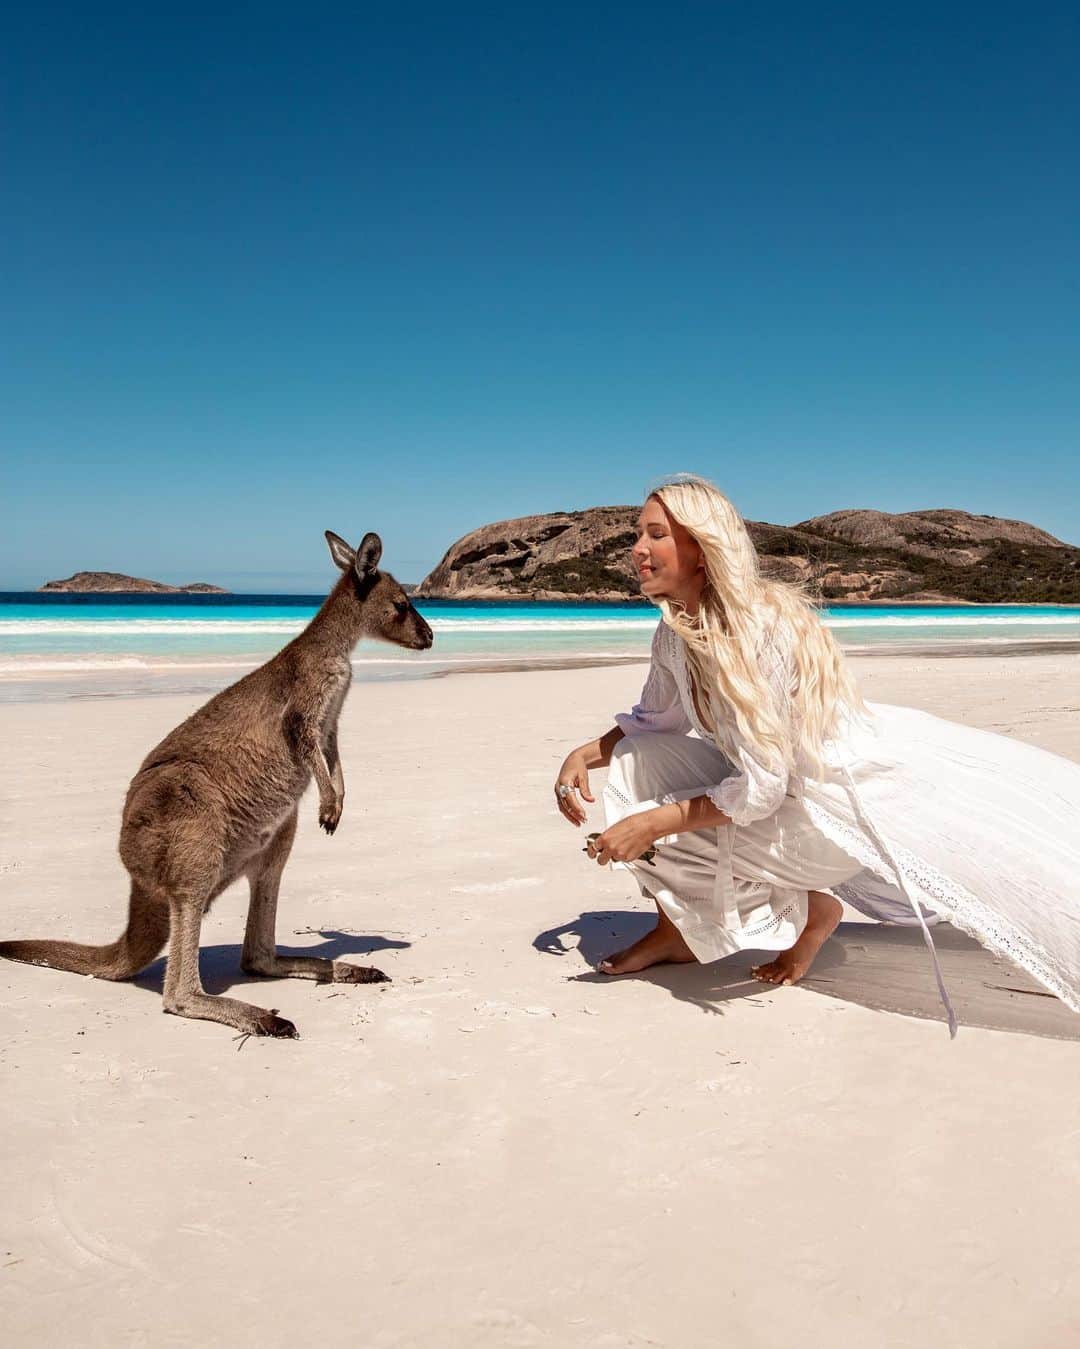 のインスタグラム：「Saying hello to the locals 🦘🦘  This is the pristine Lucky Bay in Cape Le Grand National park, known as one of the best beaches in the world and home to some very friendly wild kangaroos that visit the beach daily.  My experience here with the kangaroos brought mixed feelings. I’ve seen a lot of kangaroos through my life in Australia and it never gets old. And while it's so cute to see them, and even get close to them, some of the tourists here were repeatedly grabbing and touching the kangaroos for photos, which was distressing to see. Especially when you think that this could be happening to them every day. In some ways they don’t seem phased, almost used to it, but if you watch closer there were moments they would get agitated trying to find a path to move away from the crowd that hovered all around them.  My children watched in disbelief, choosing to stay completely away in protest, out of respect for the kangaroos. If you find some patience and allow them to move freely they will come and investigate you, generally searching for food. It's absolutely vital for the sake of their health and wellbeing you do not ever feed them. Luckily we didn't see any of this happening while we were there.  Today is also #WorldKangarooDay and I’d like to share my gratitude to those who care for our precious kangaroos, especially after the horrific bushfires we had this year.  What many people may not know is that kangaroos are the most slaughtered terrestrial wildlife species in the world 😢   There is a perception in Australia that kangaroos are a pest, populations are too high and they are overgrazing the land. The big issue is they are competing for resources with cows raised and slaughtered for the beef industry. An industry that is resource intensive and one of the most destructive for our environment and biodiversity. With threats to current farming practices and land management, kangaroo populations are controlled with government sanctioned cullings. These occur at night and according to the RSPCA large numbers are being shot inhumanely with some joeys left to die without their mothers.  Continued in comments 👇🏼」